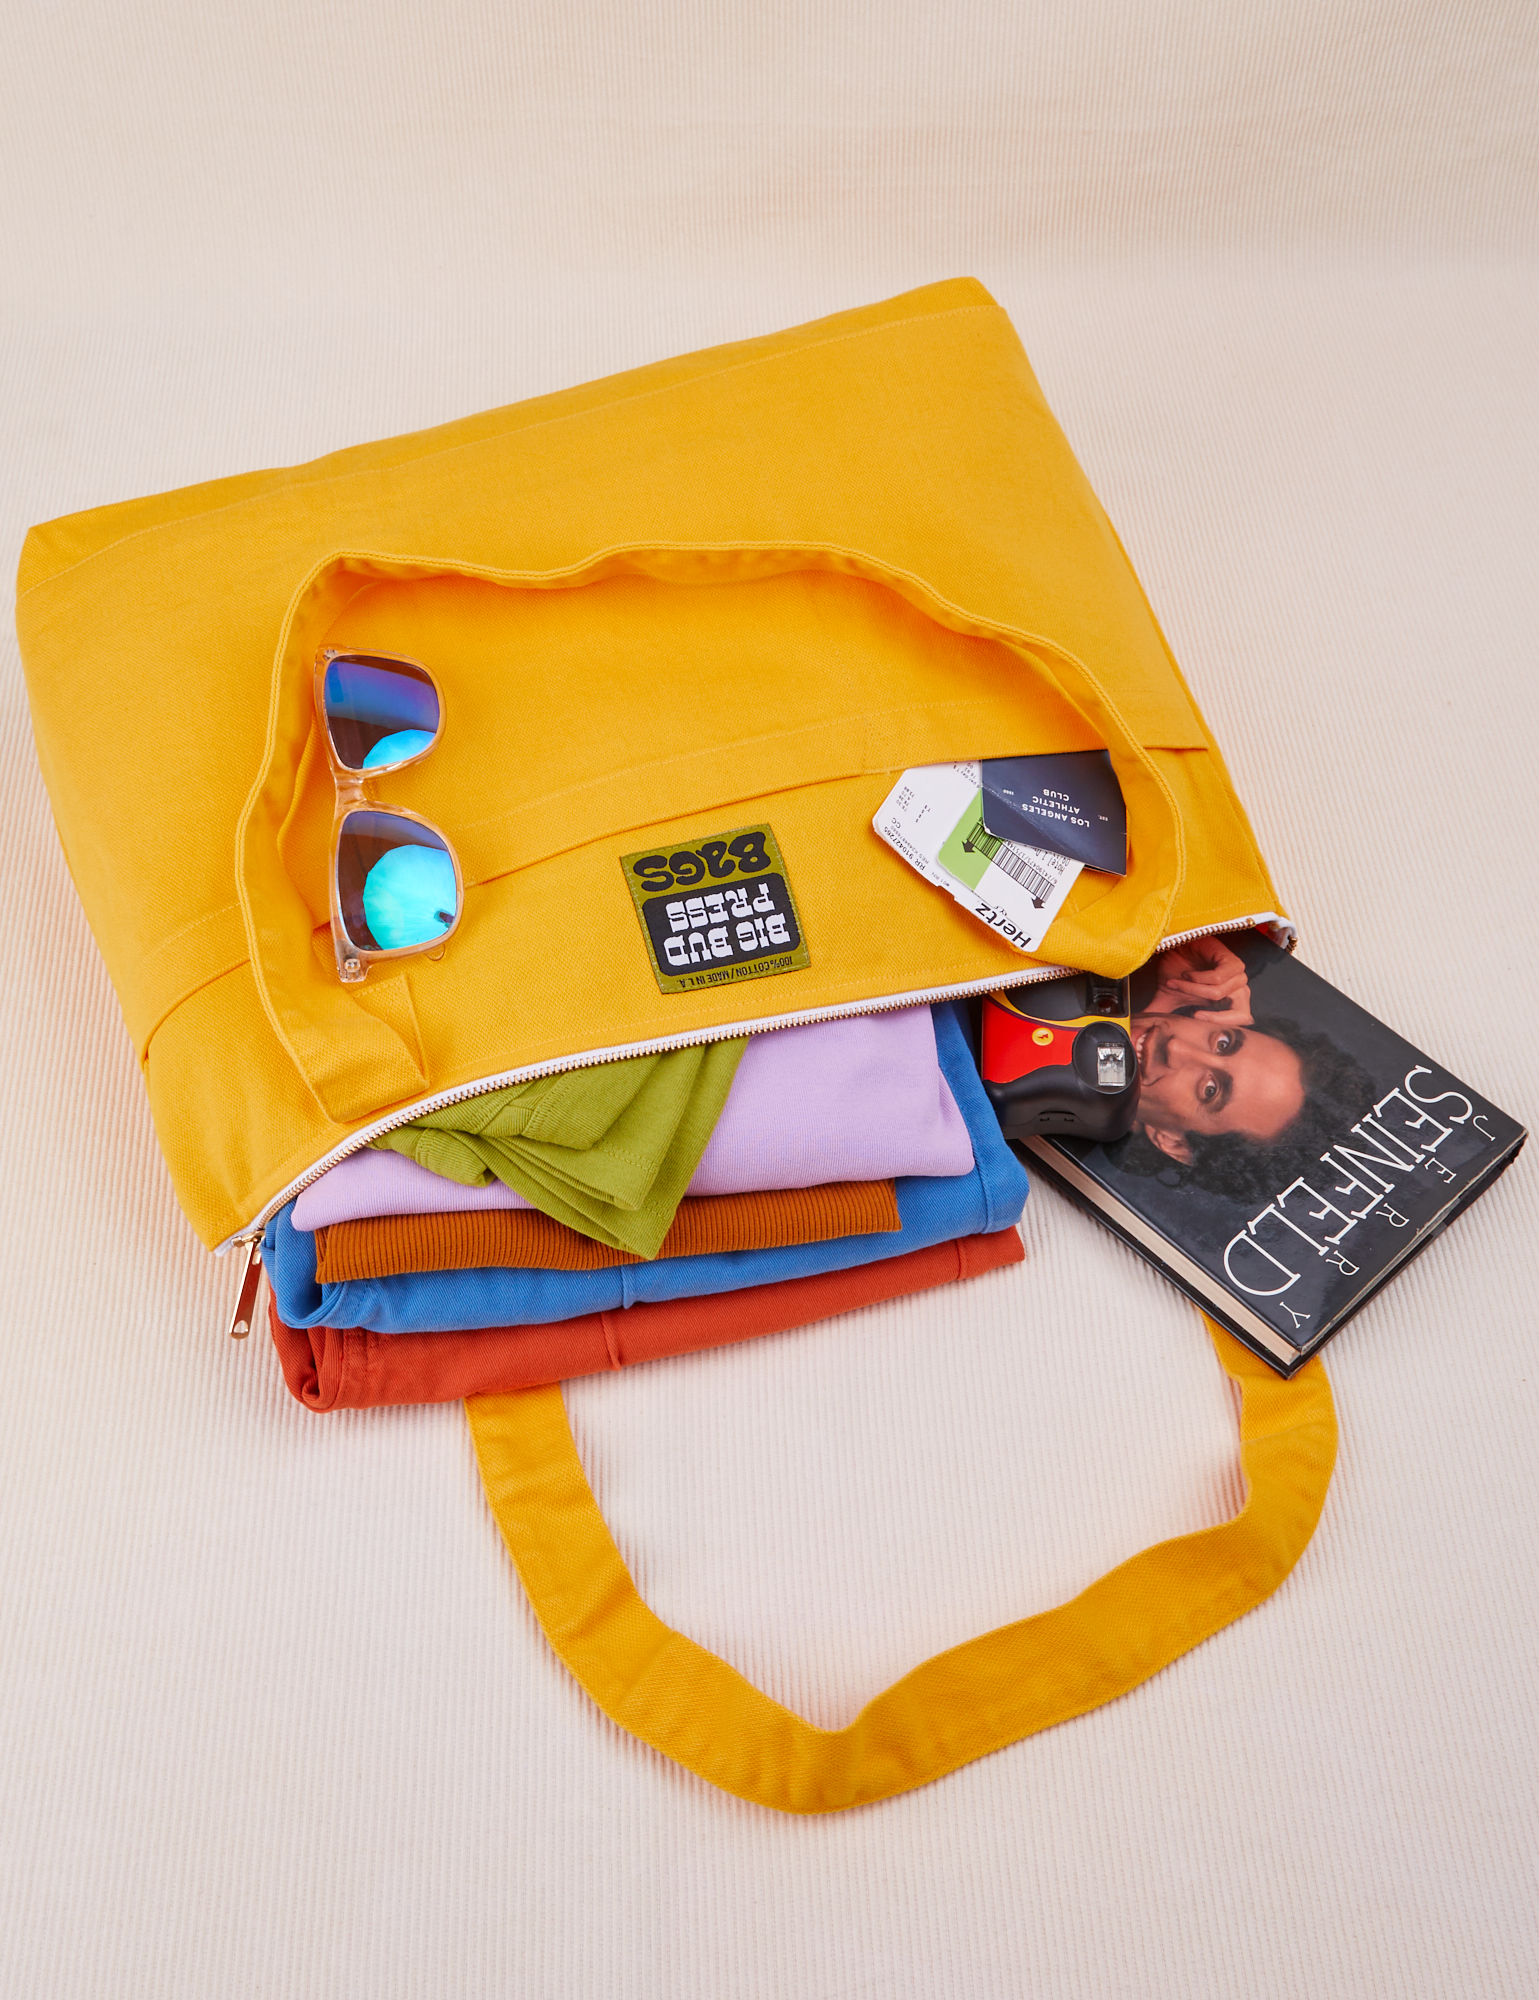 XL Zip Tote in Sunshine Yellow packed with clothing, books, camera